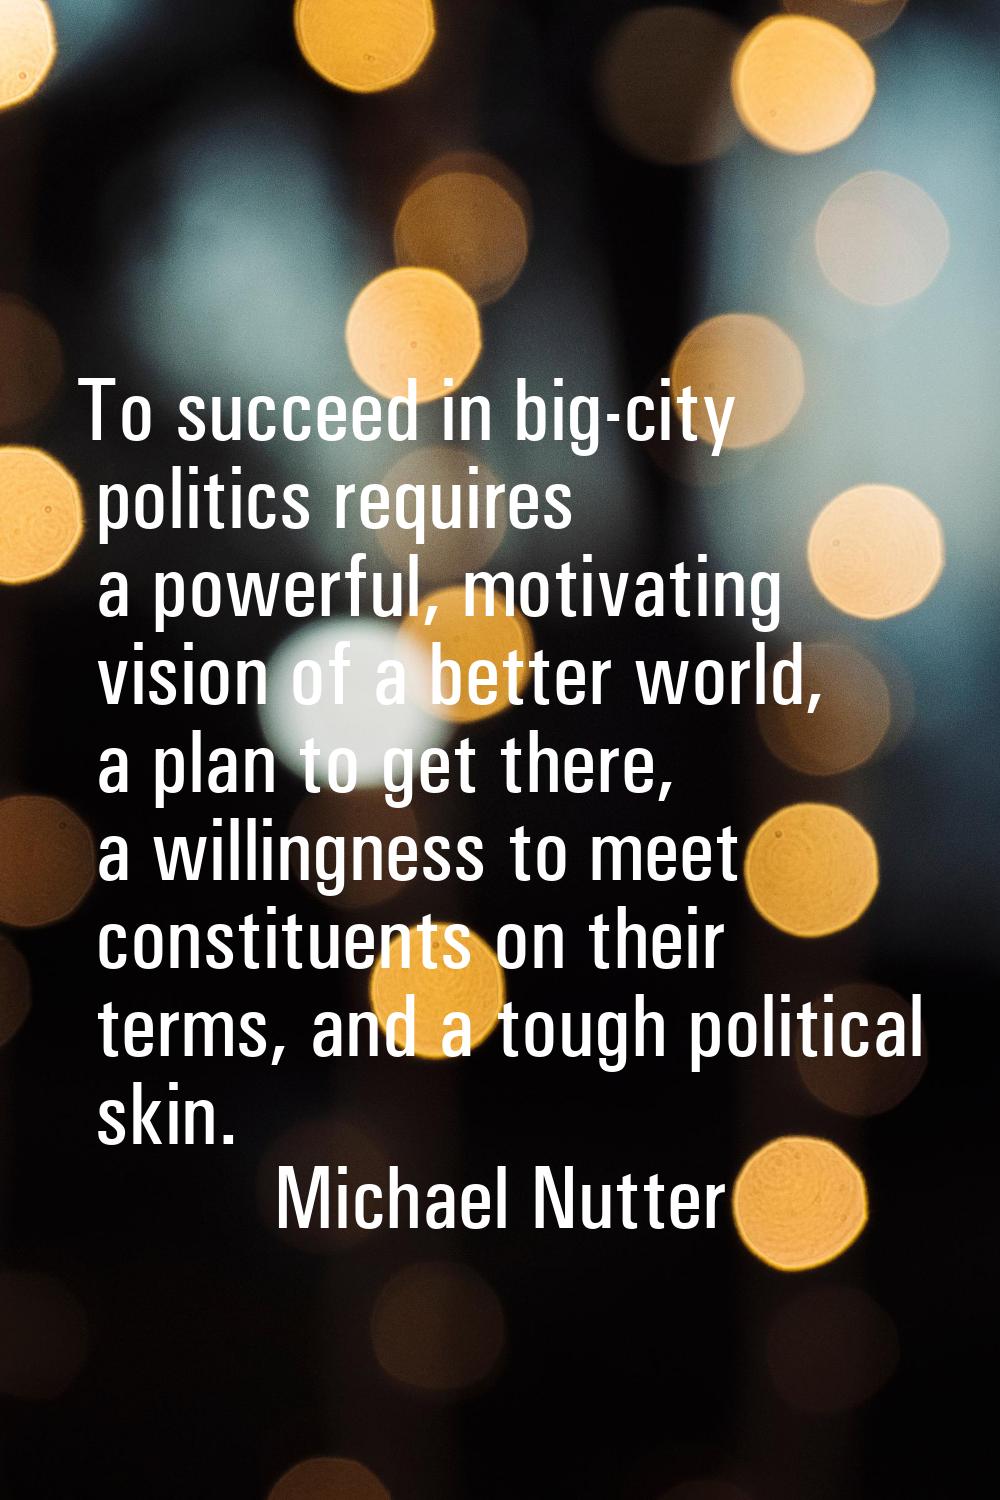 To succeed in big-city politics requires a powerful, motivating vision of a better world, a plan to